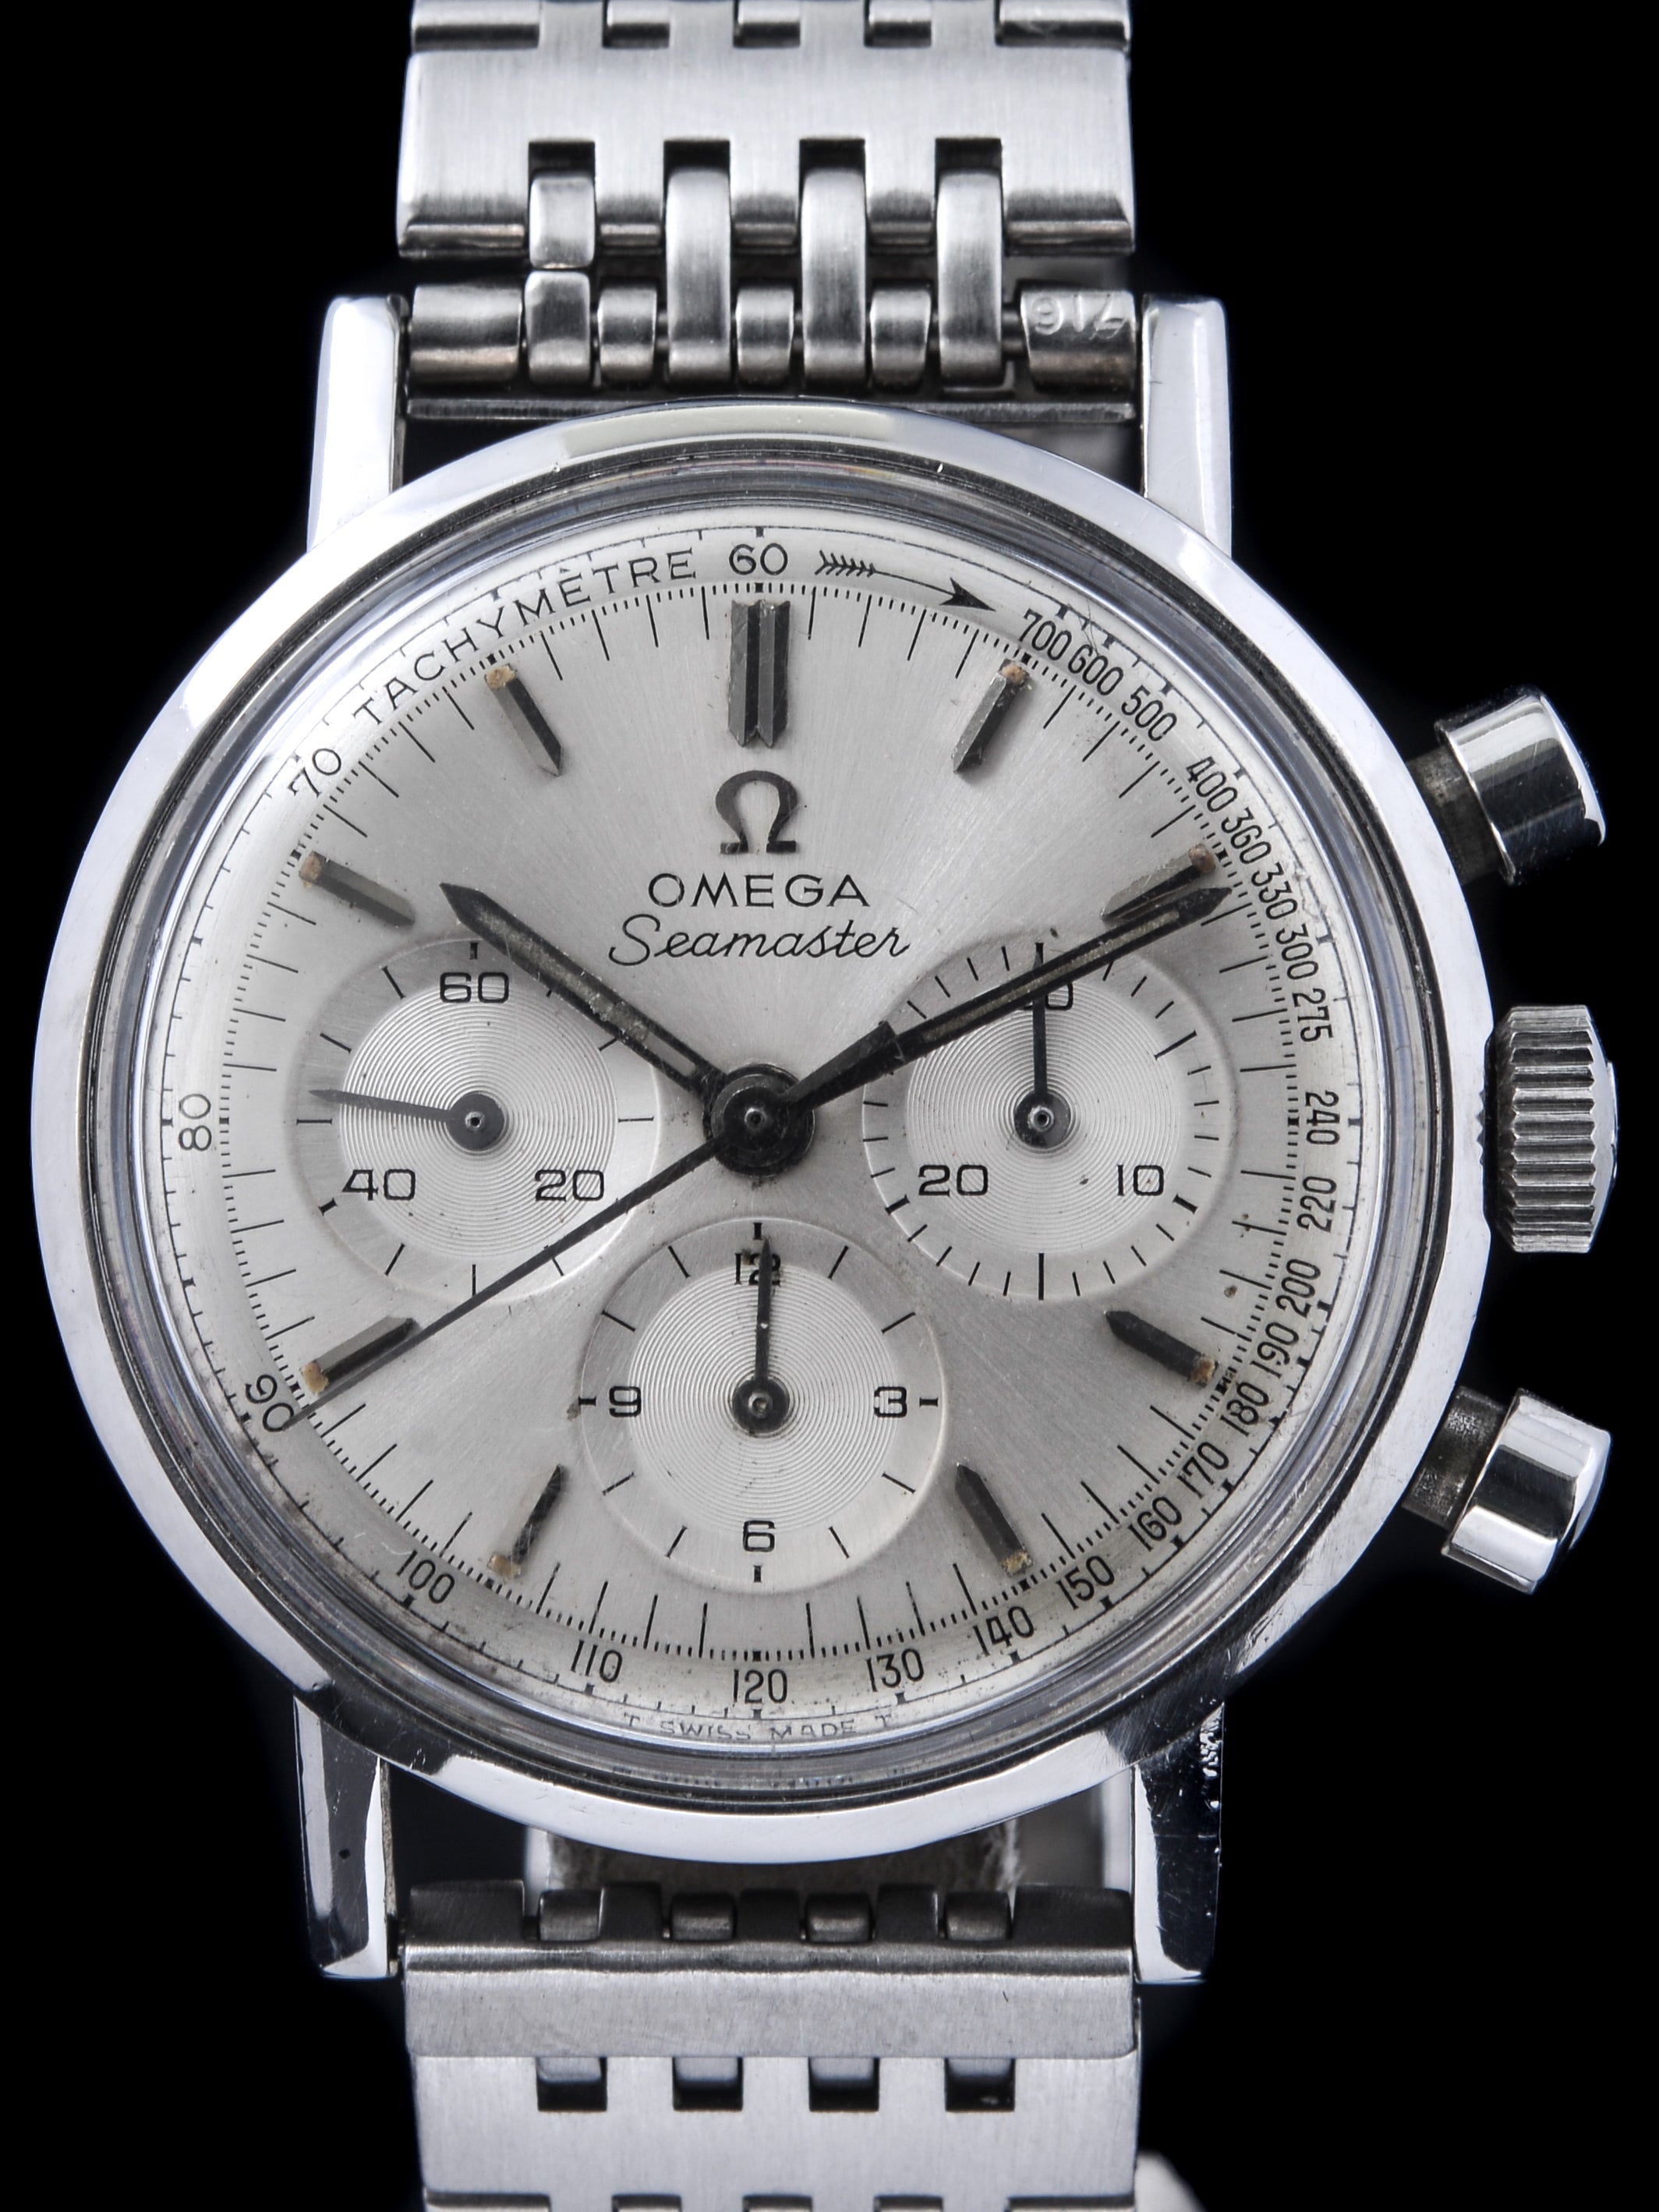 1967 Omega Seamaster Chronograph Cal. 321 (Ref.145.005) With Papers